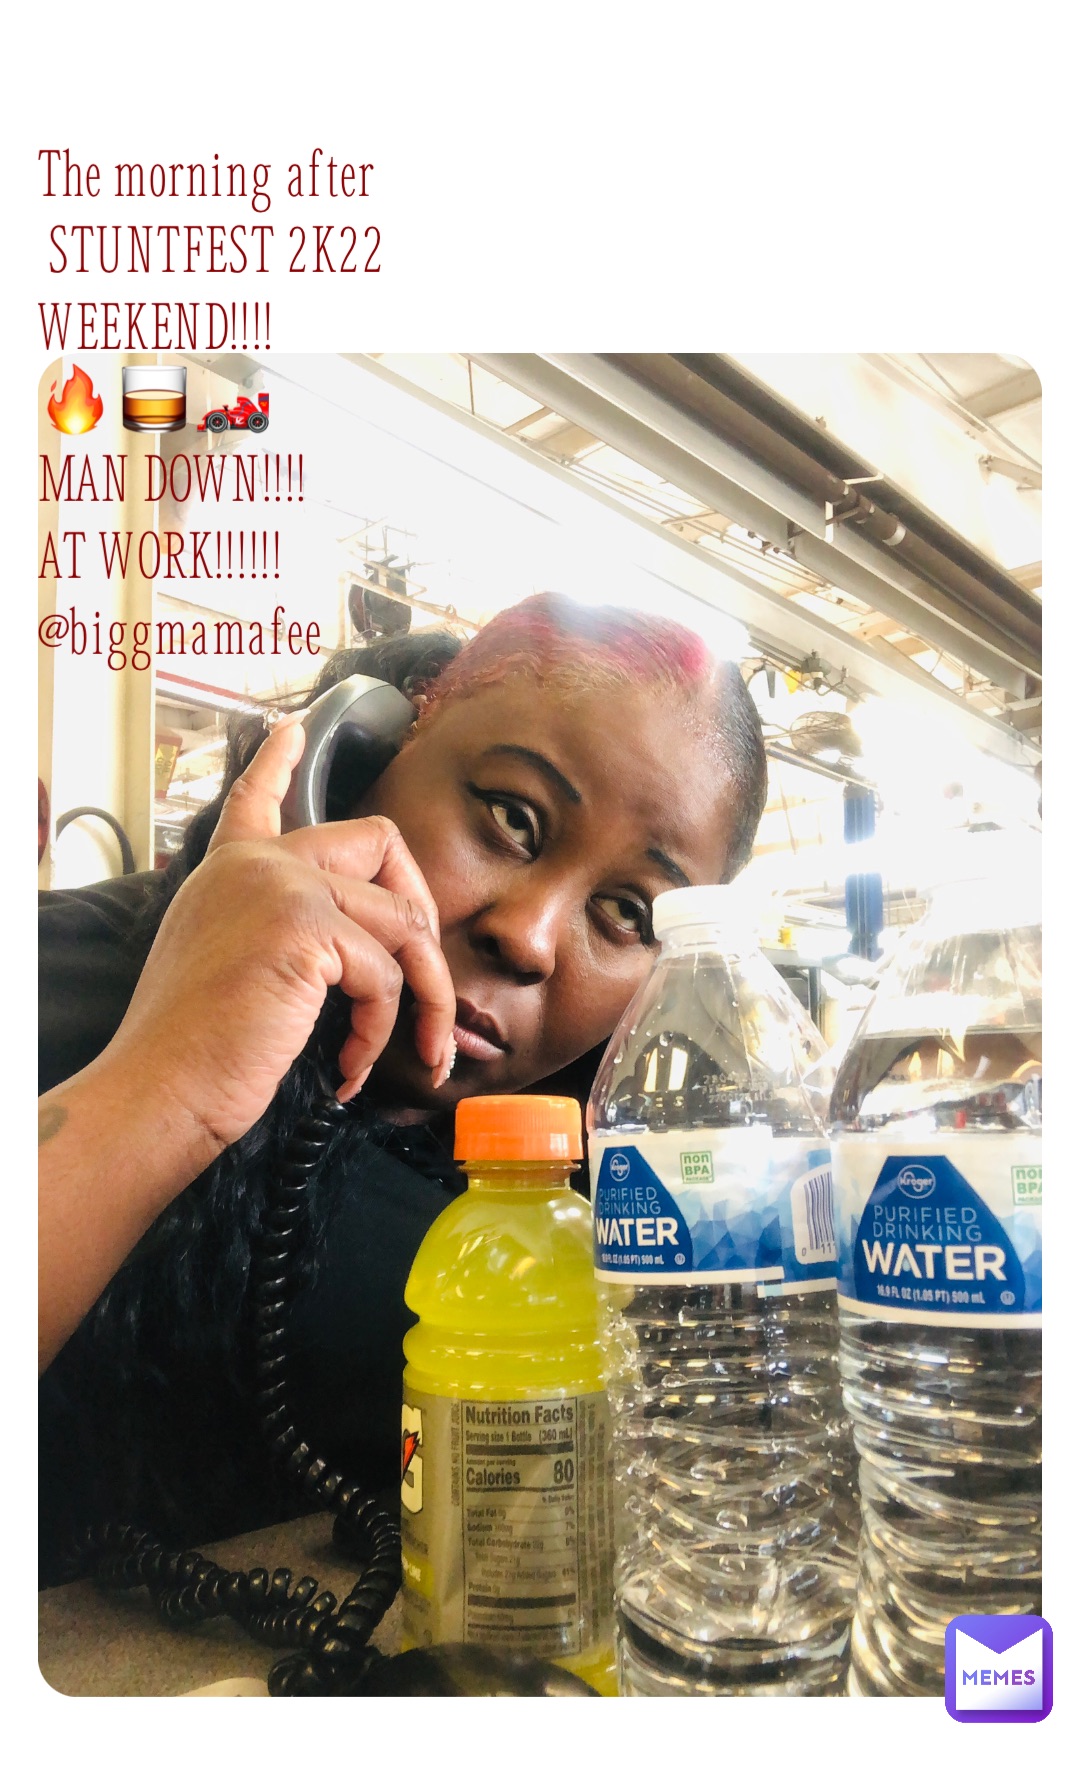 The morning after
 STUNTFEST 2K22
WEEKEND!!!!
🔥🥃🏎
MAN DOWN!!!!
AT WORK!!!!!!
@biggmamafee